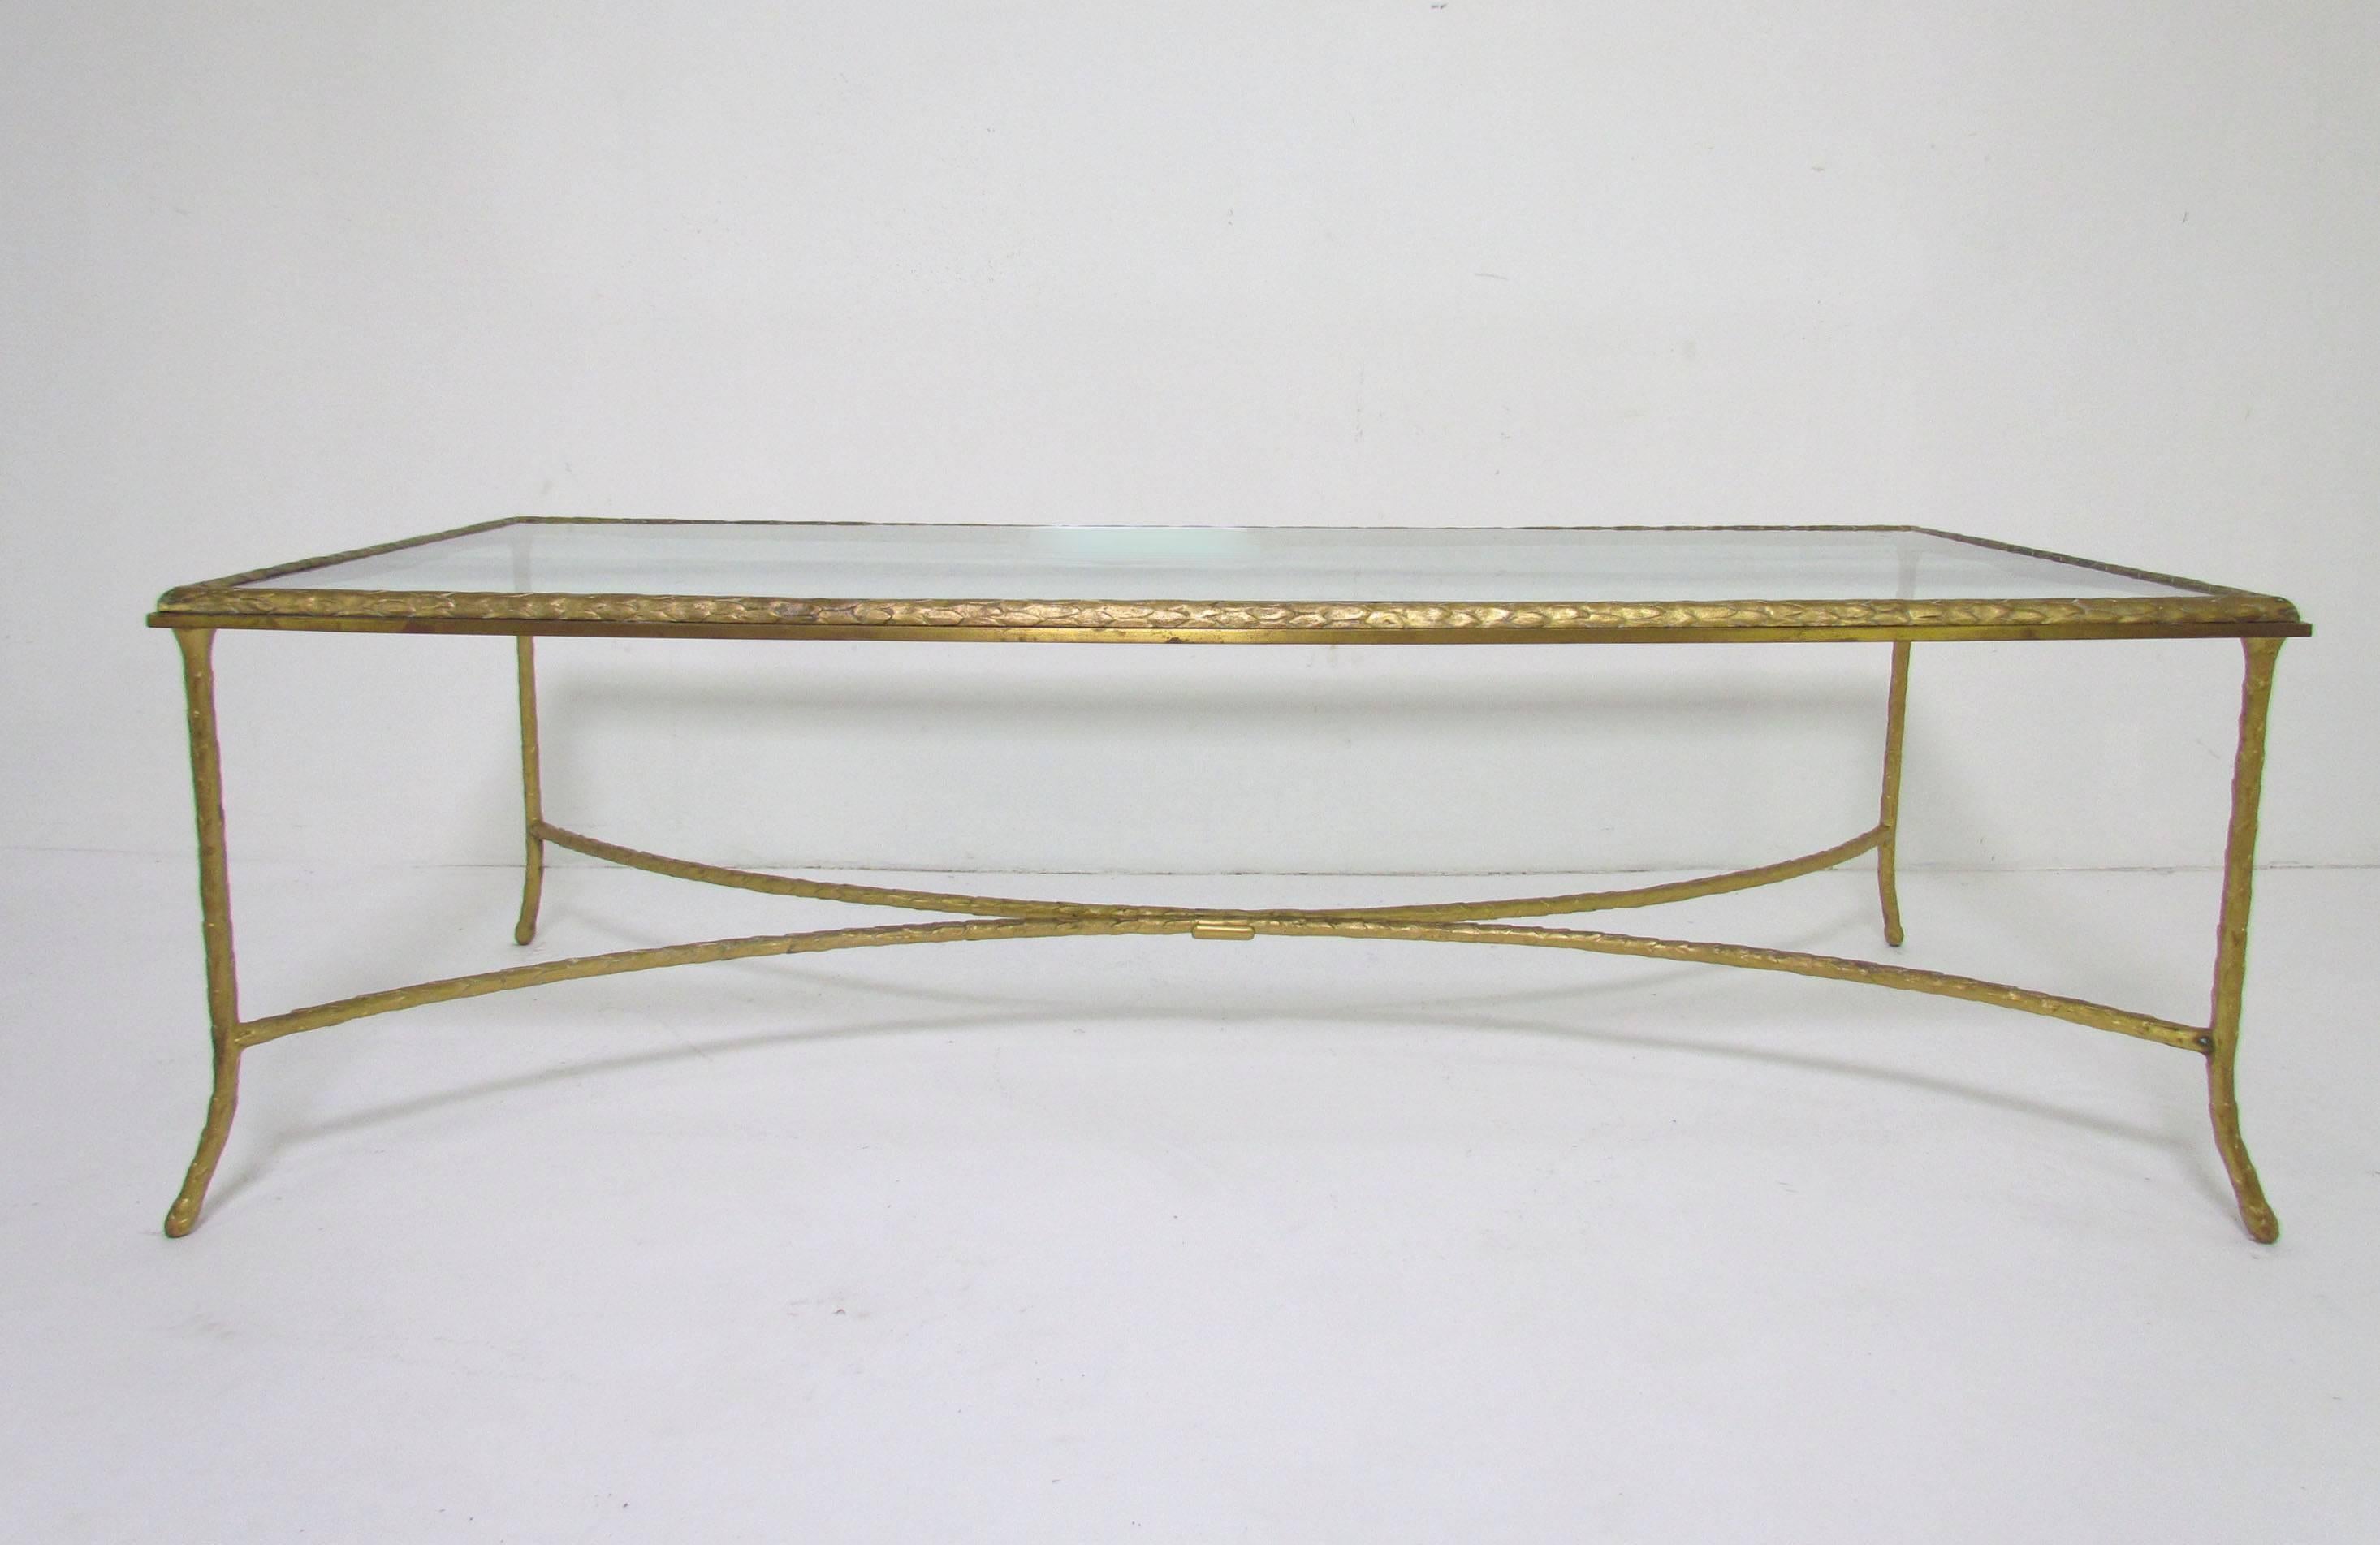 Gilded bronze coffee table with chiseled palm leaf pattern, attributed to Maison Bagues, circa 1950s.